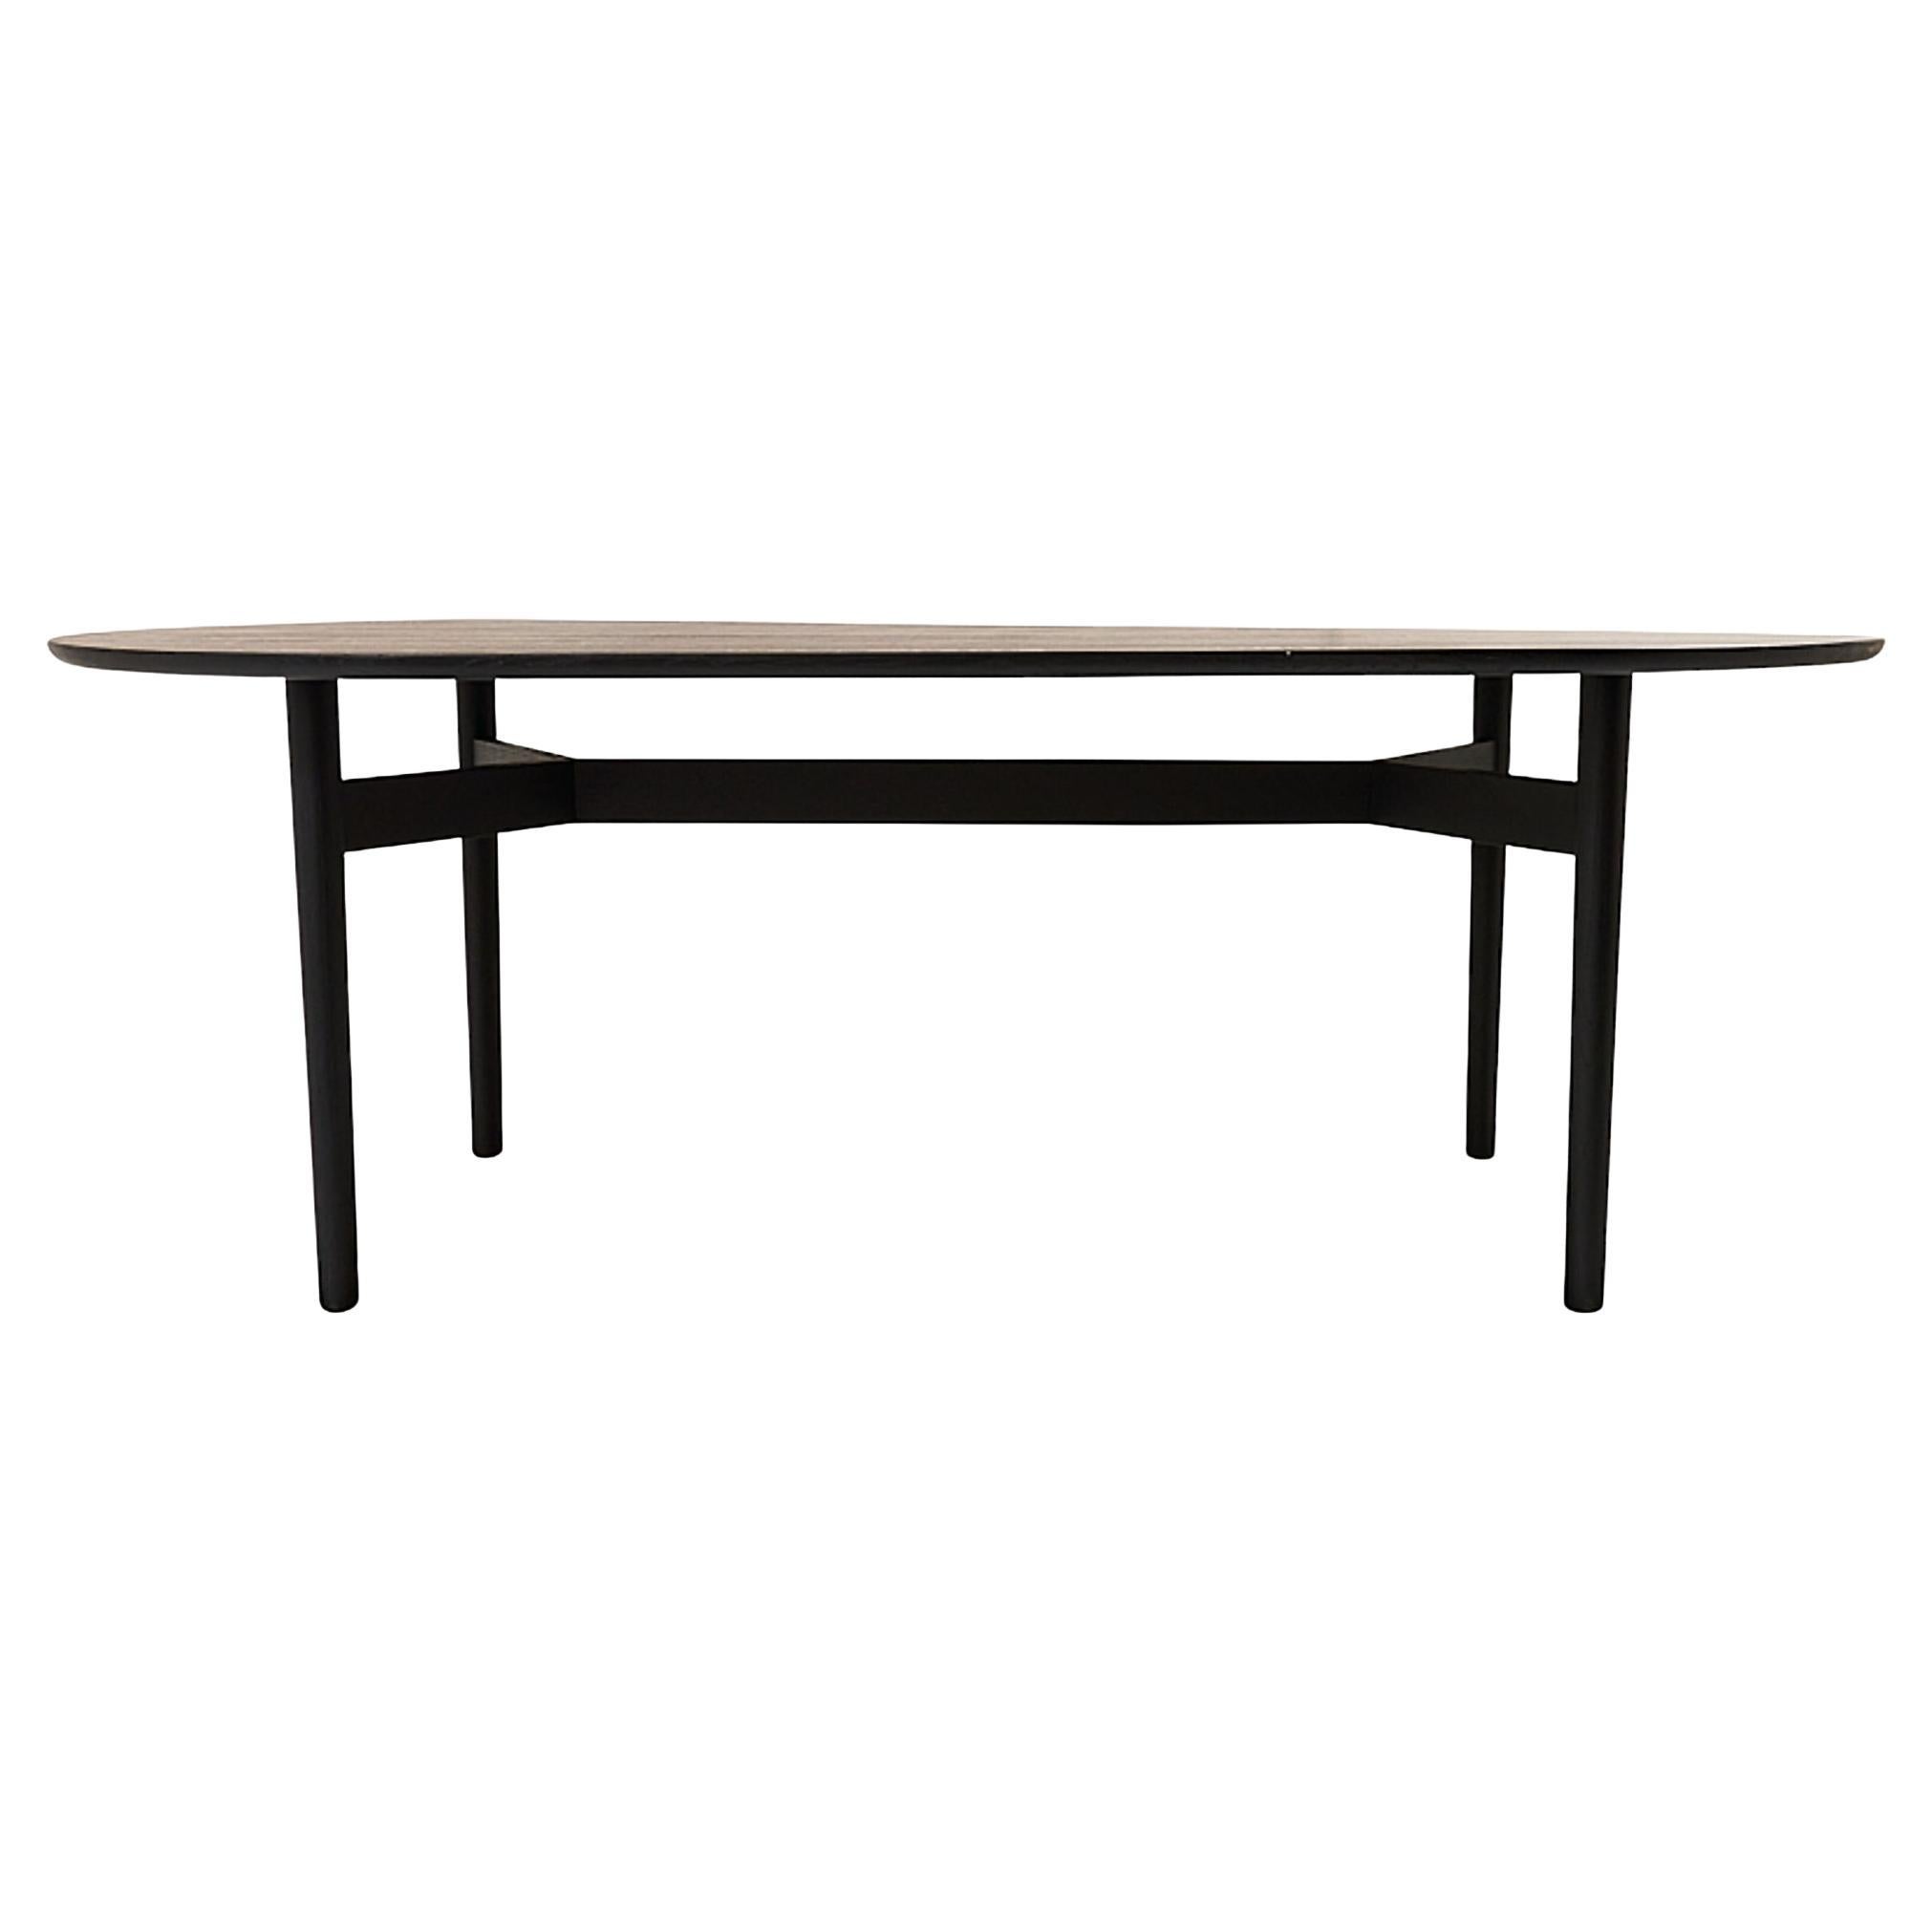 Schumacher Editions Puffin 84" Dining Table in Soft Black For Sale